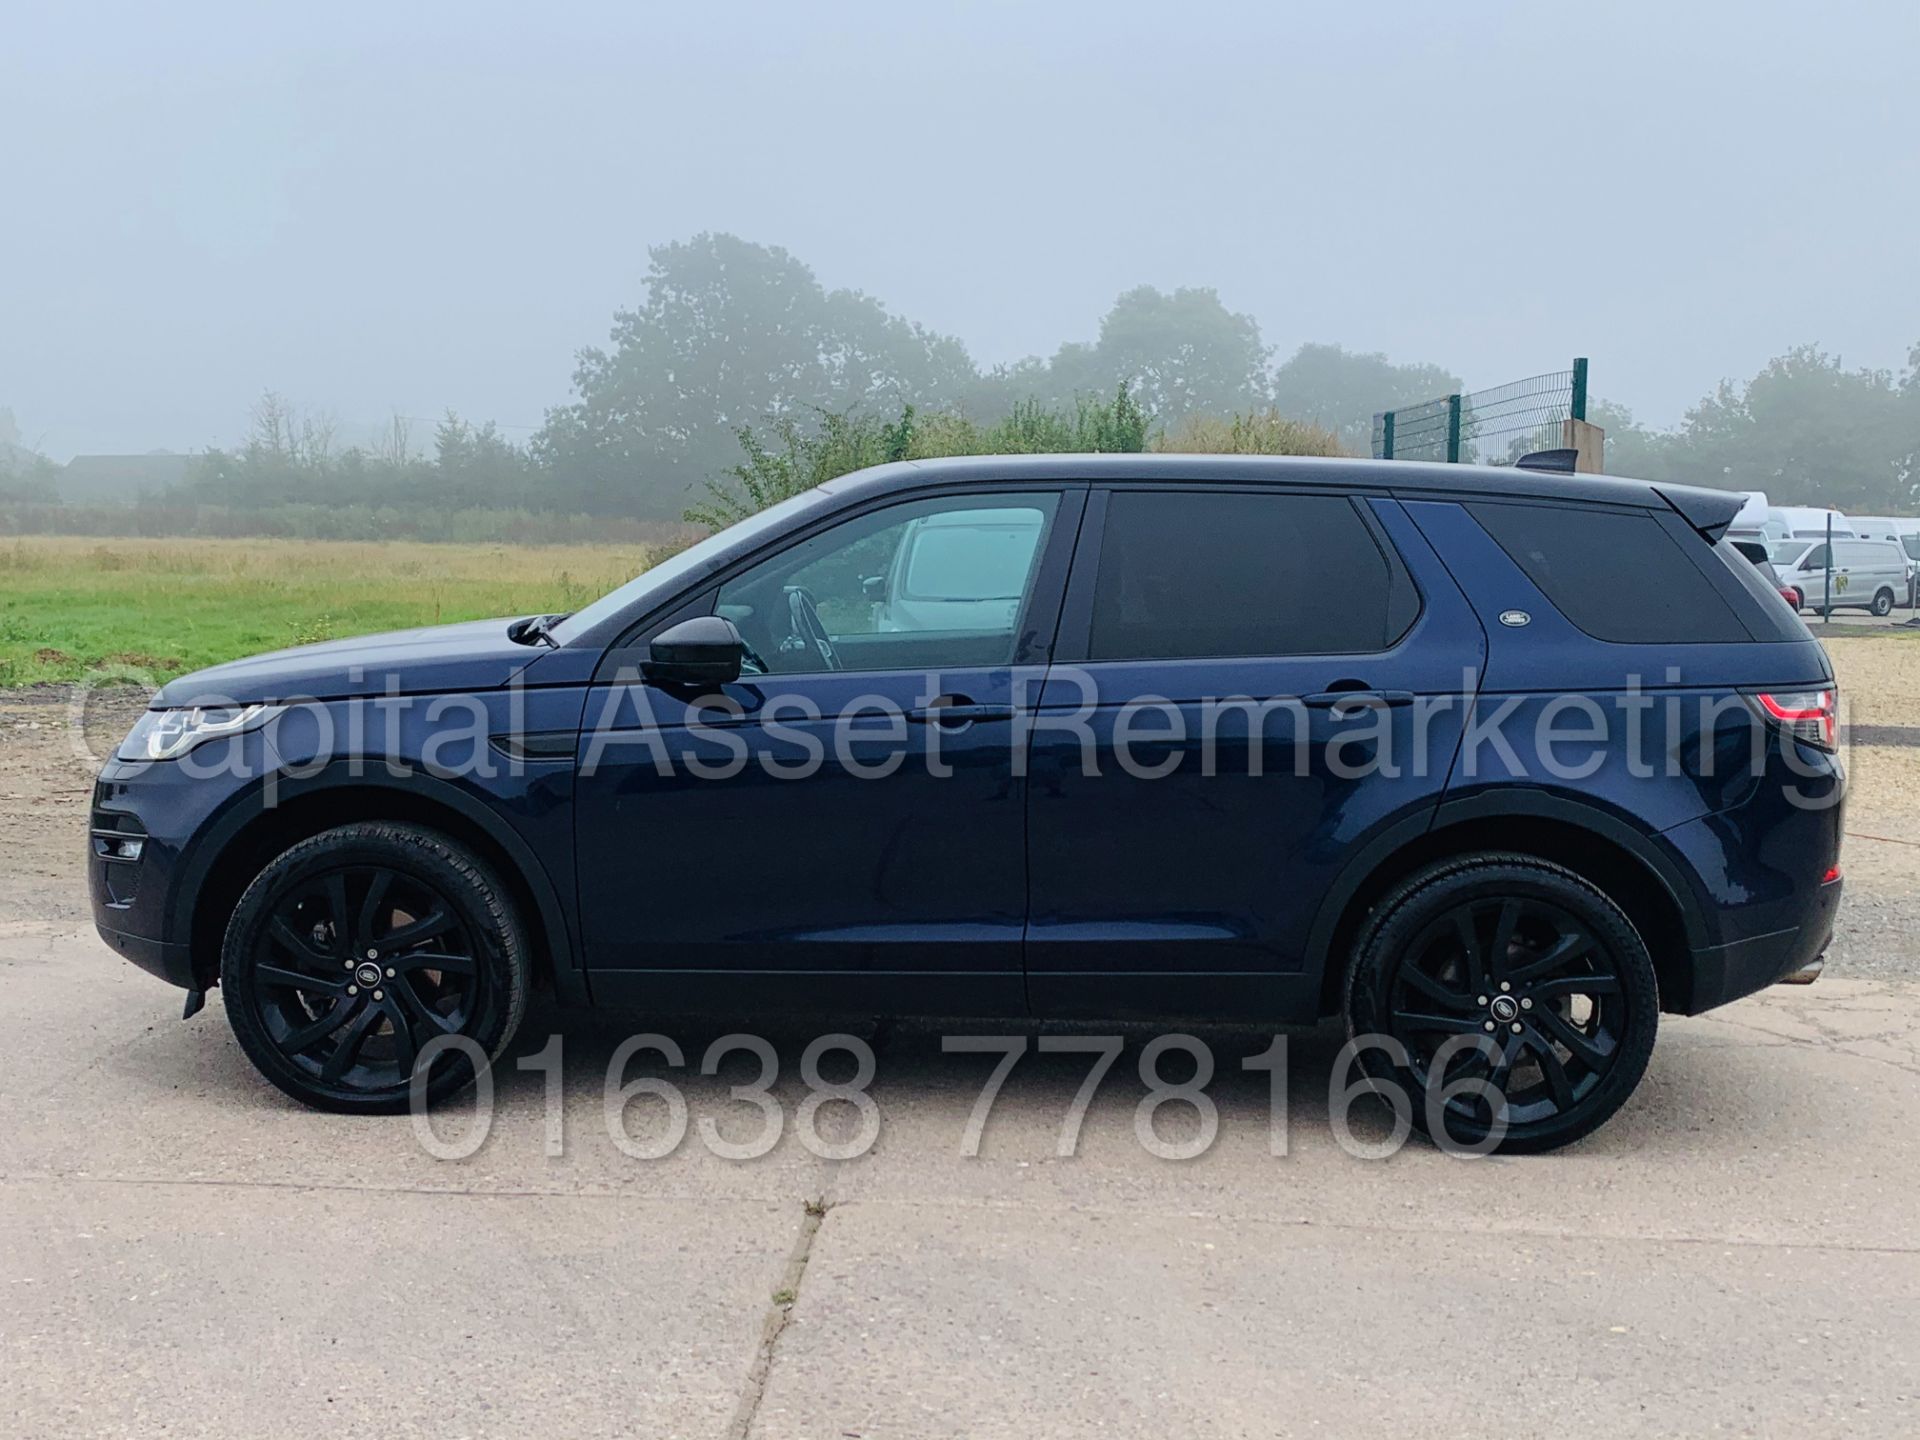 LAND ROVER DISCOVERY SPORT *HSE BLACK EDITION* SUV (2017 MODEL) '2.0 TD4 - AUTO' **MASSIVE SPEC** - Image 8 of 59